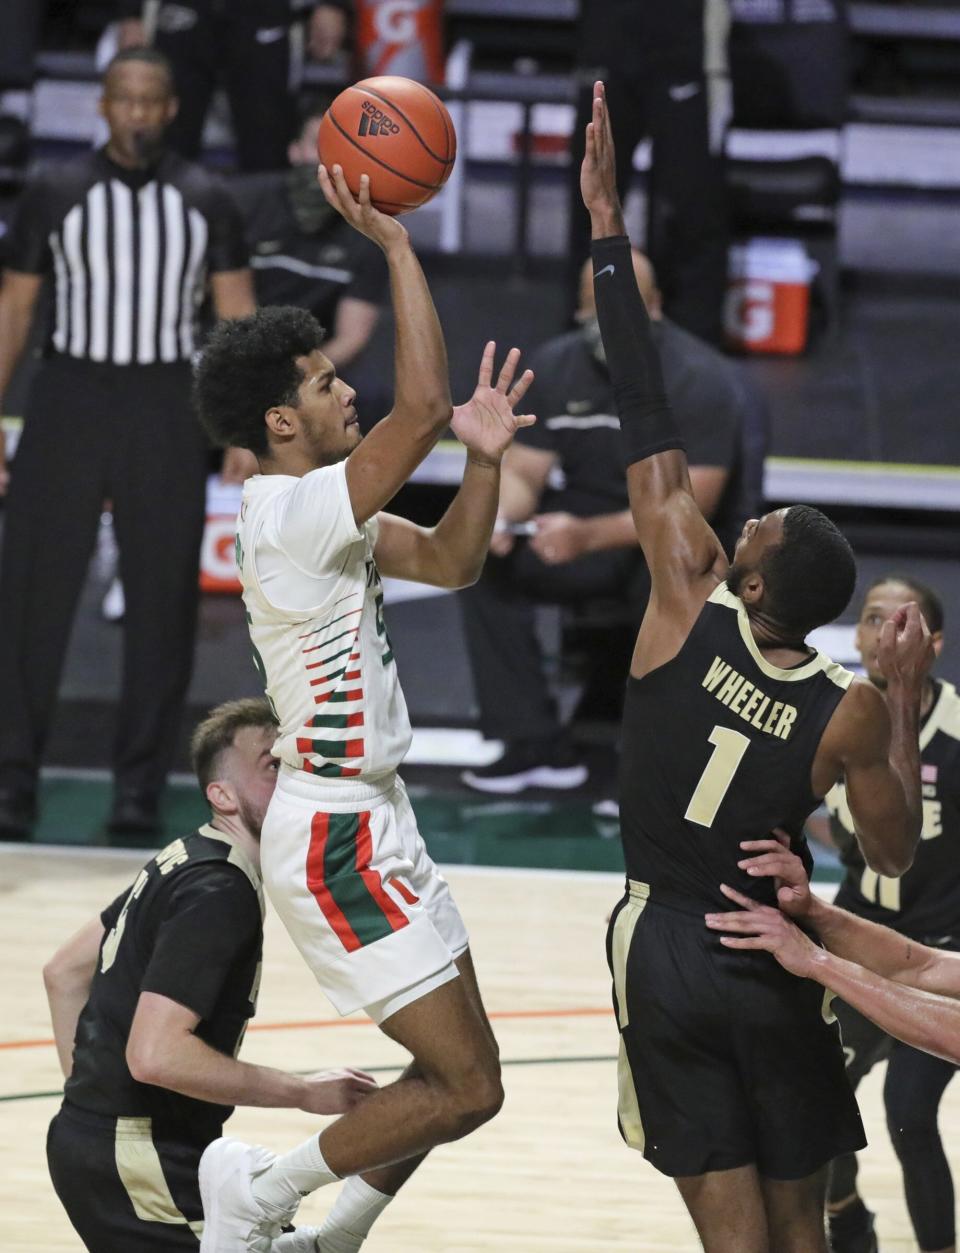 Miami guard Harlond Beverly (5) shoots over Purdue forward Aaron Wheeler (1) during the first half of an NCAA college basketball game Tuesday, Dec. 8, 2020, in Coral Gables, Fla. (Al Diaz/Miami Herald via AP)